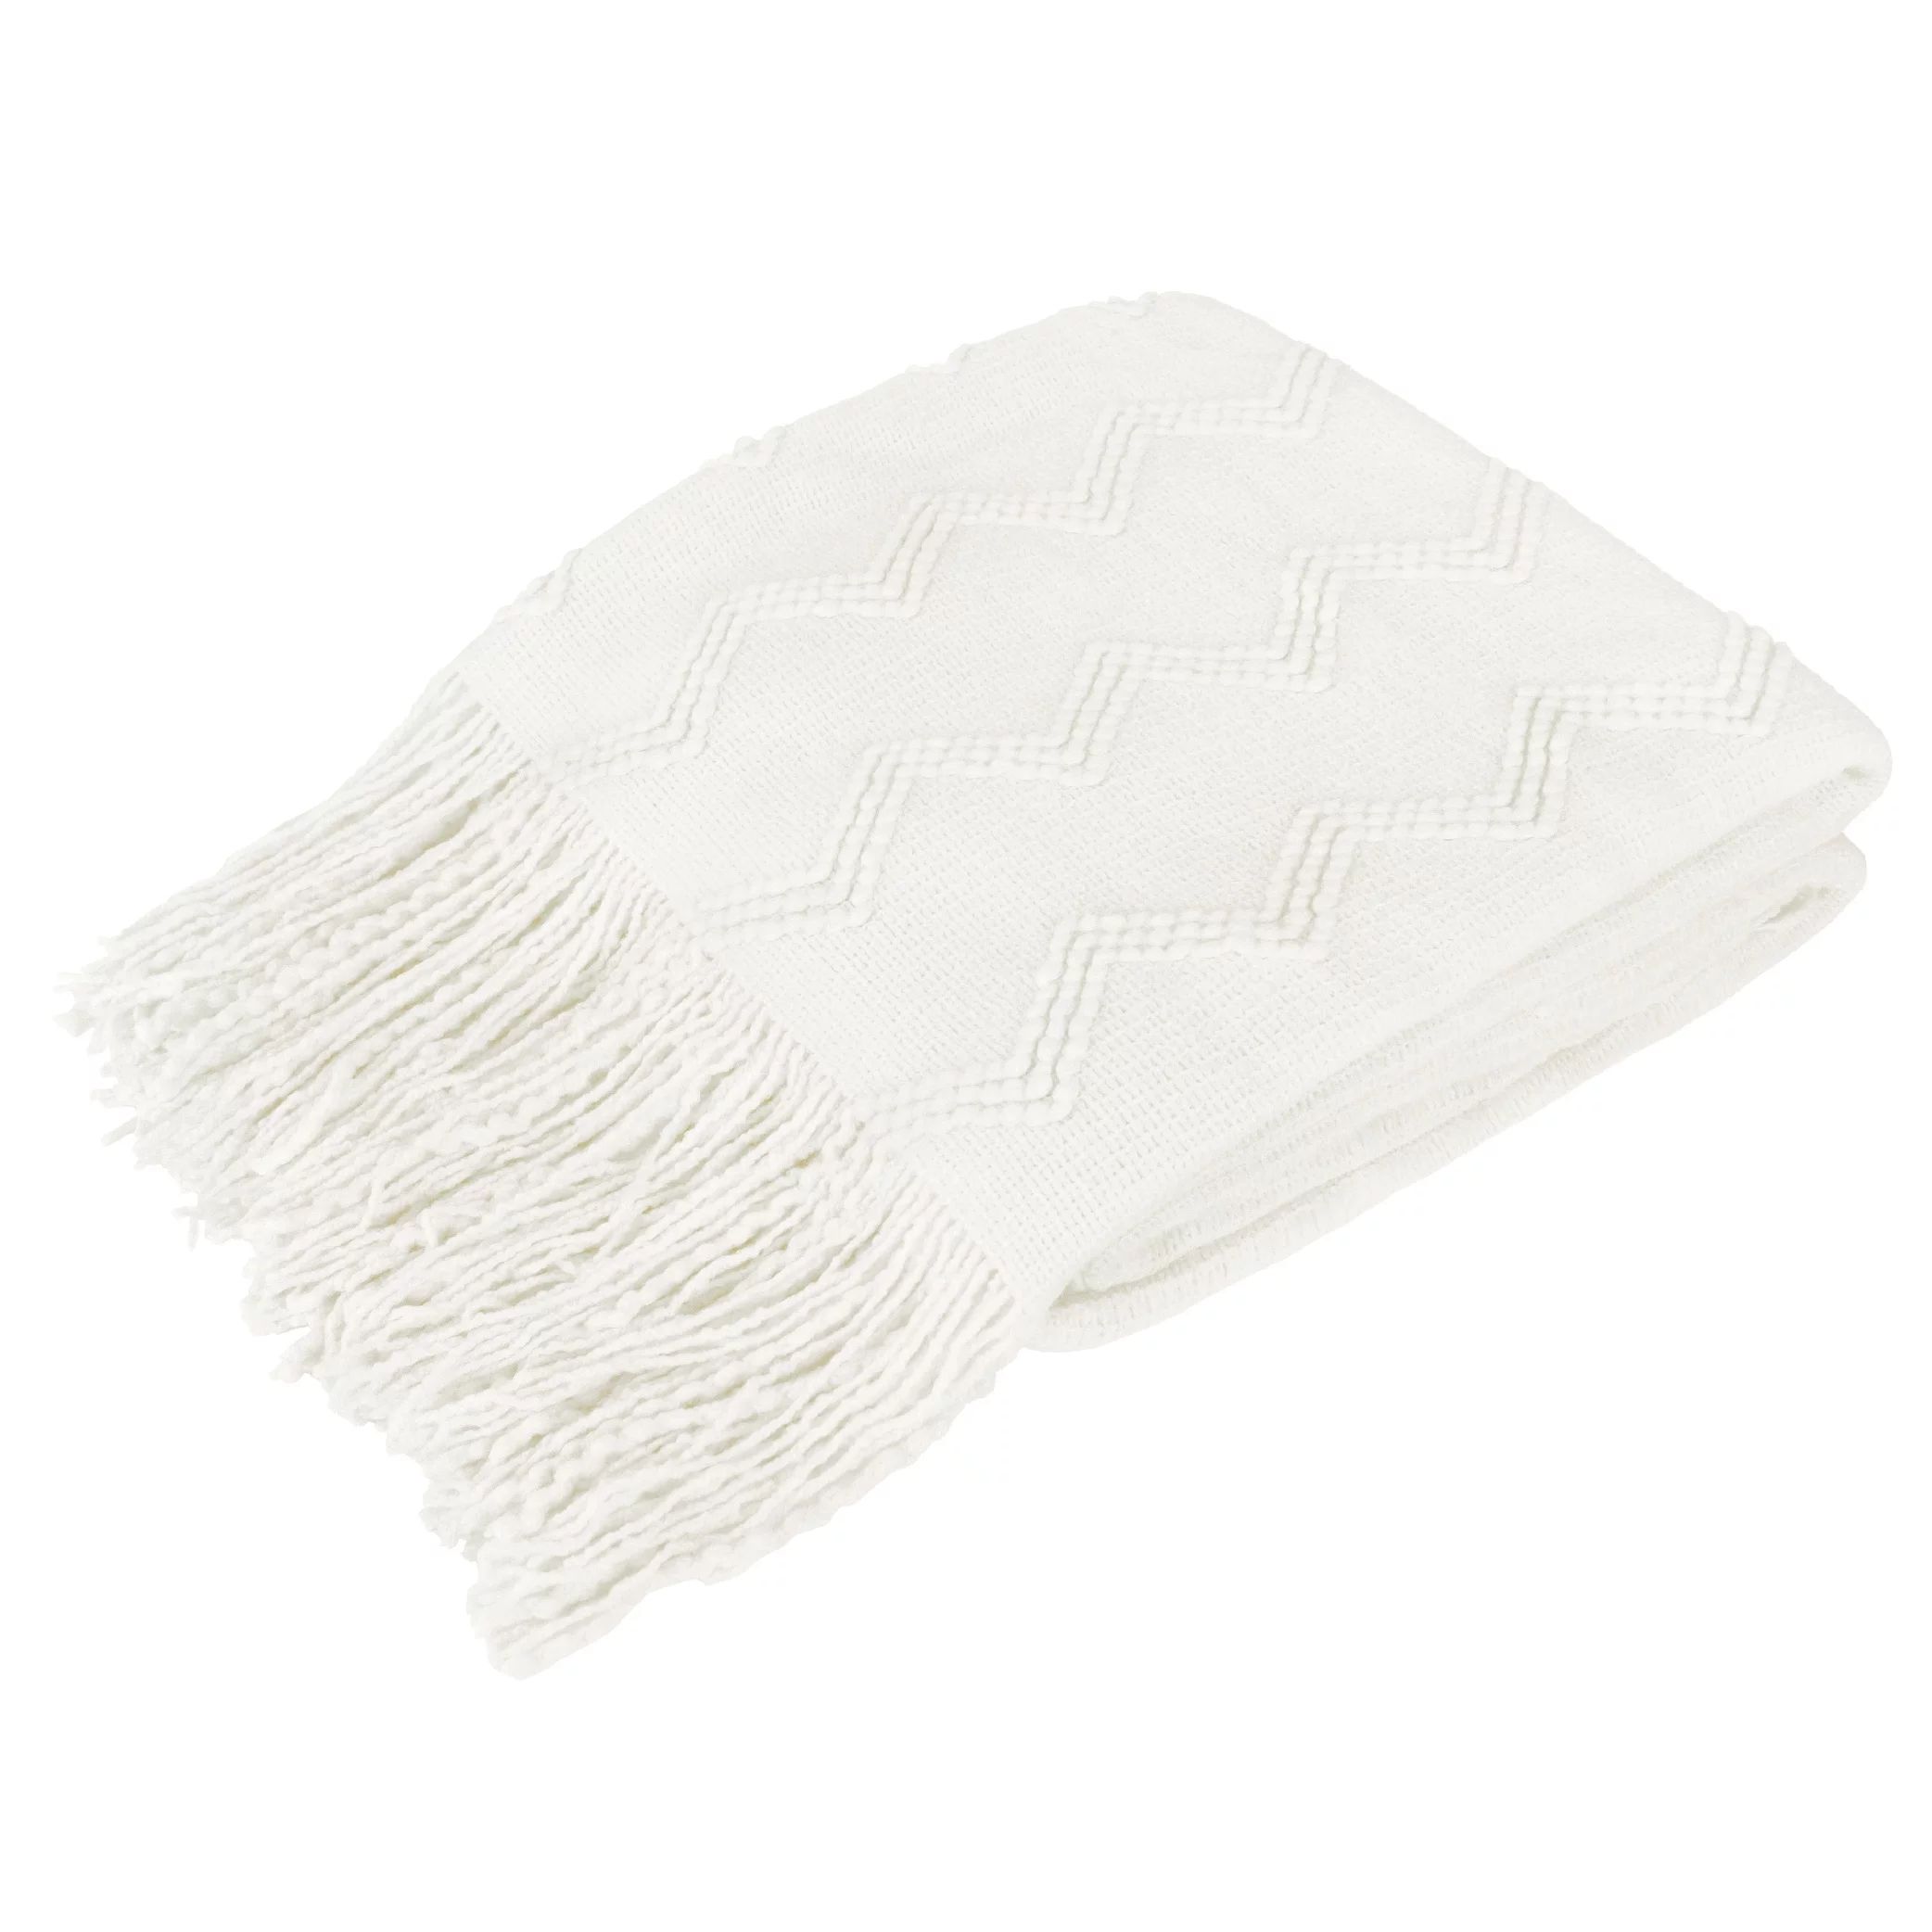 PAVILIA White Knit Throw Blanket for Couch, Soft Knitted Boho Blanket, Farmhouse Home Decor Woven... | Walmart (US)